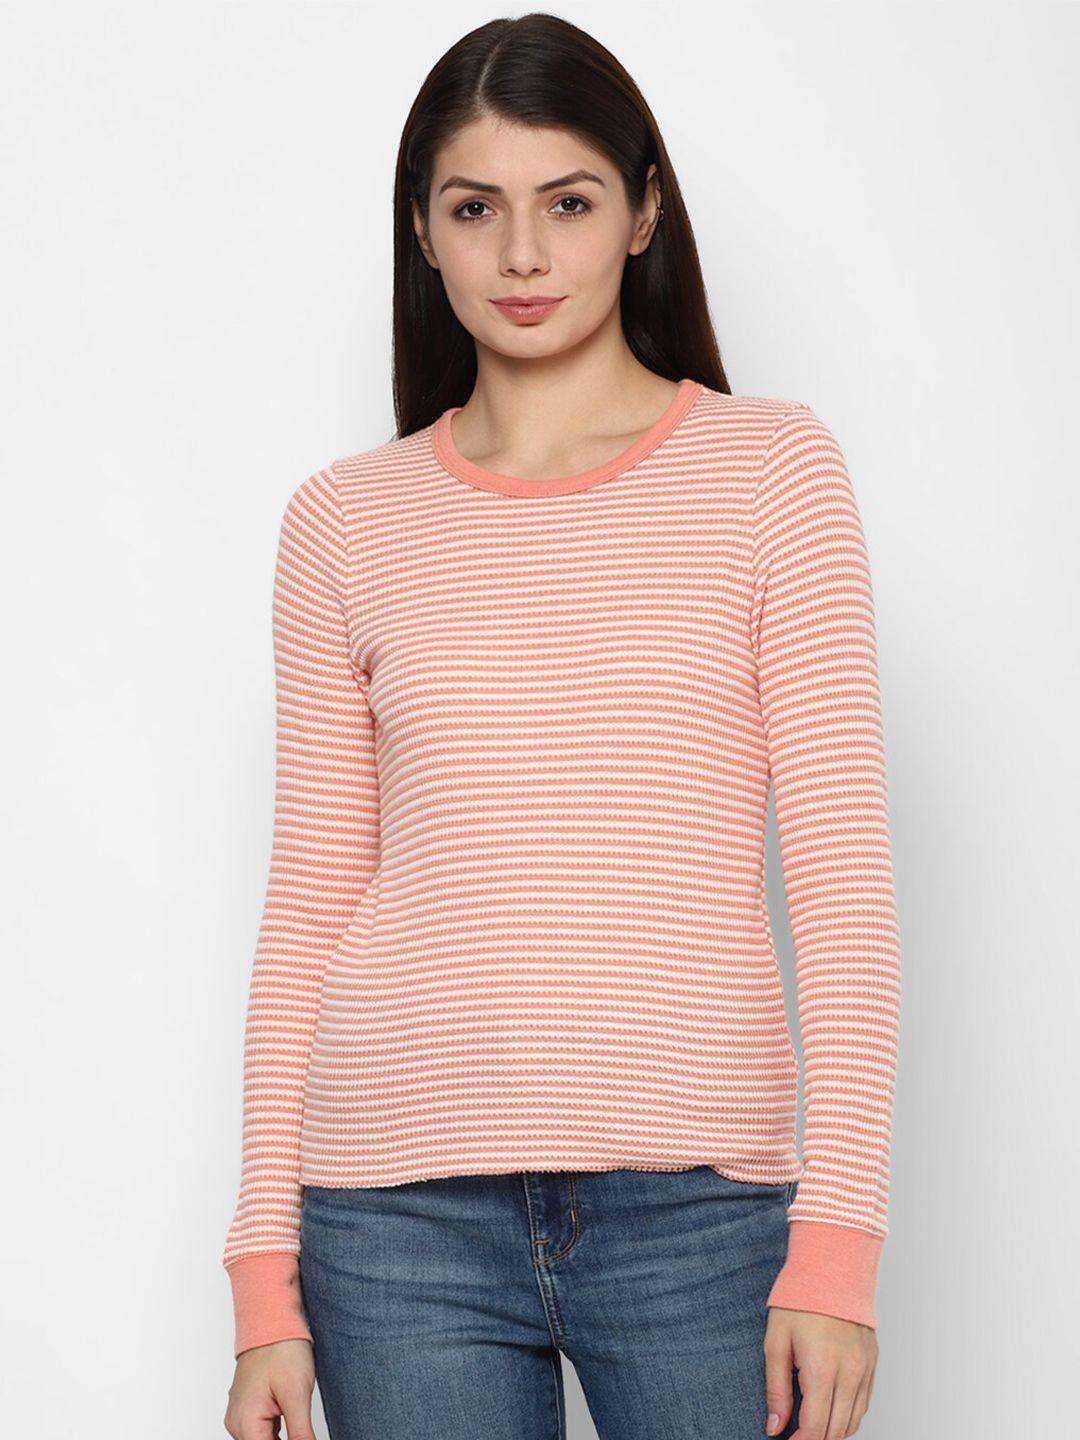 american-eagle-outfitters-women-peach-coloured-striped-regular-fit-t-shirt